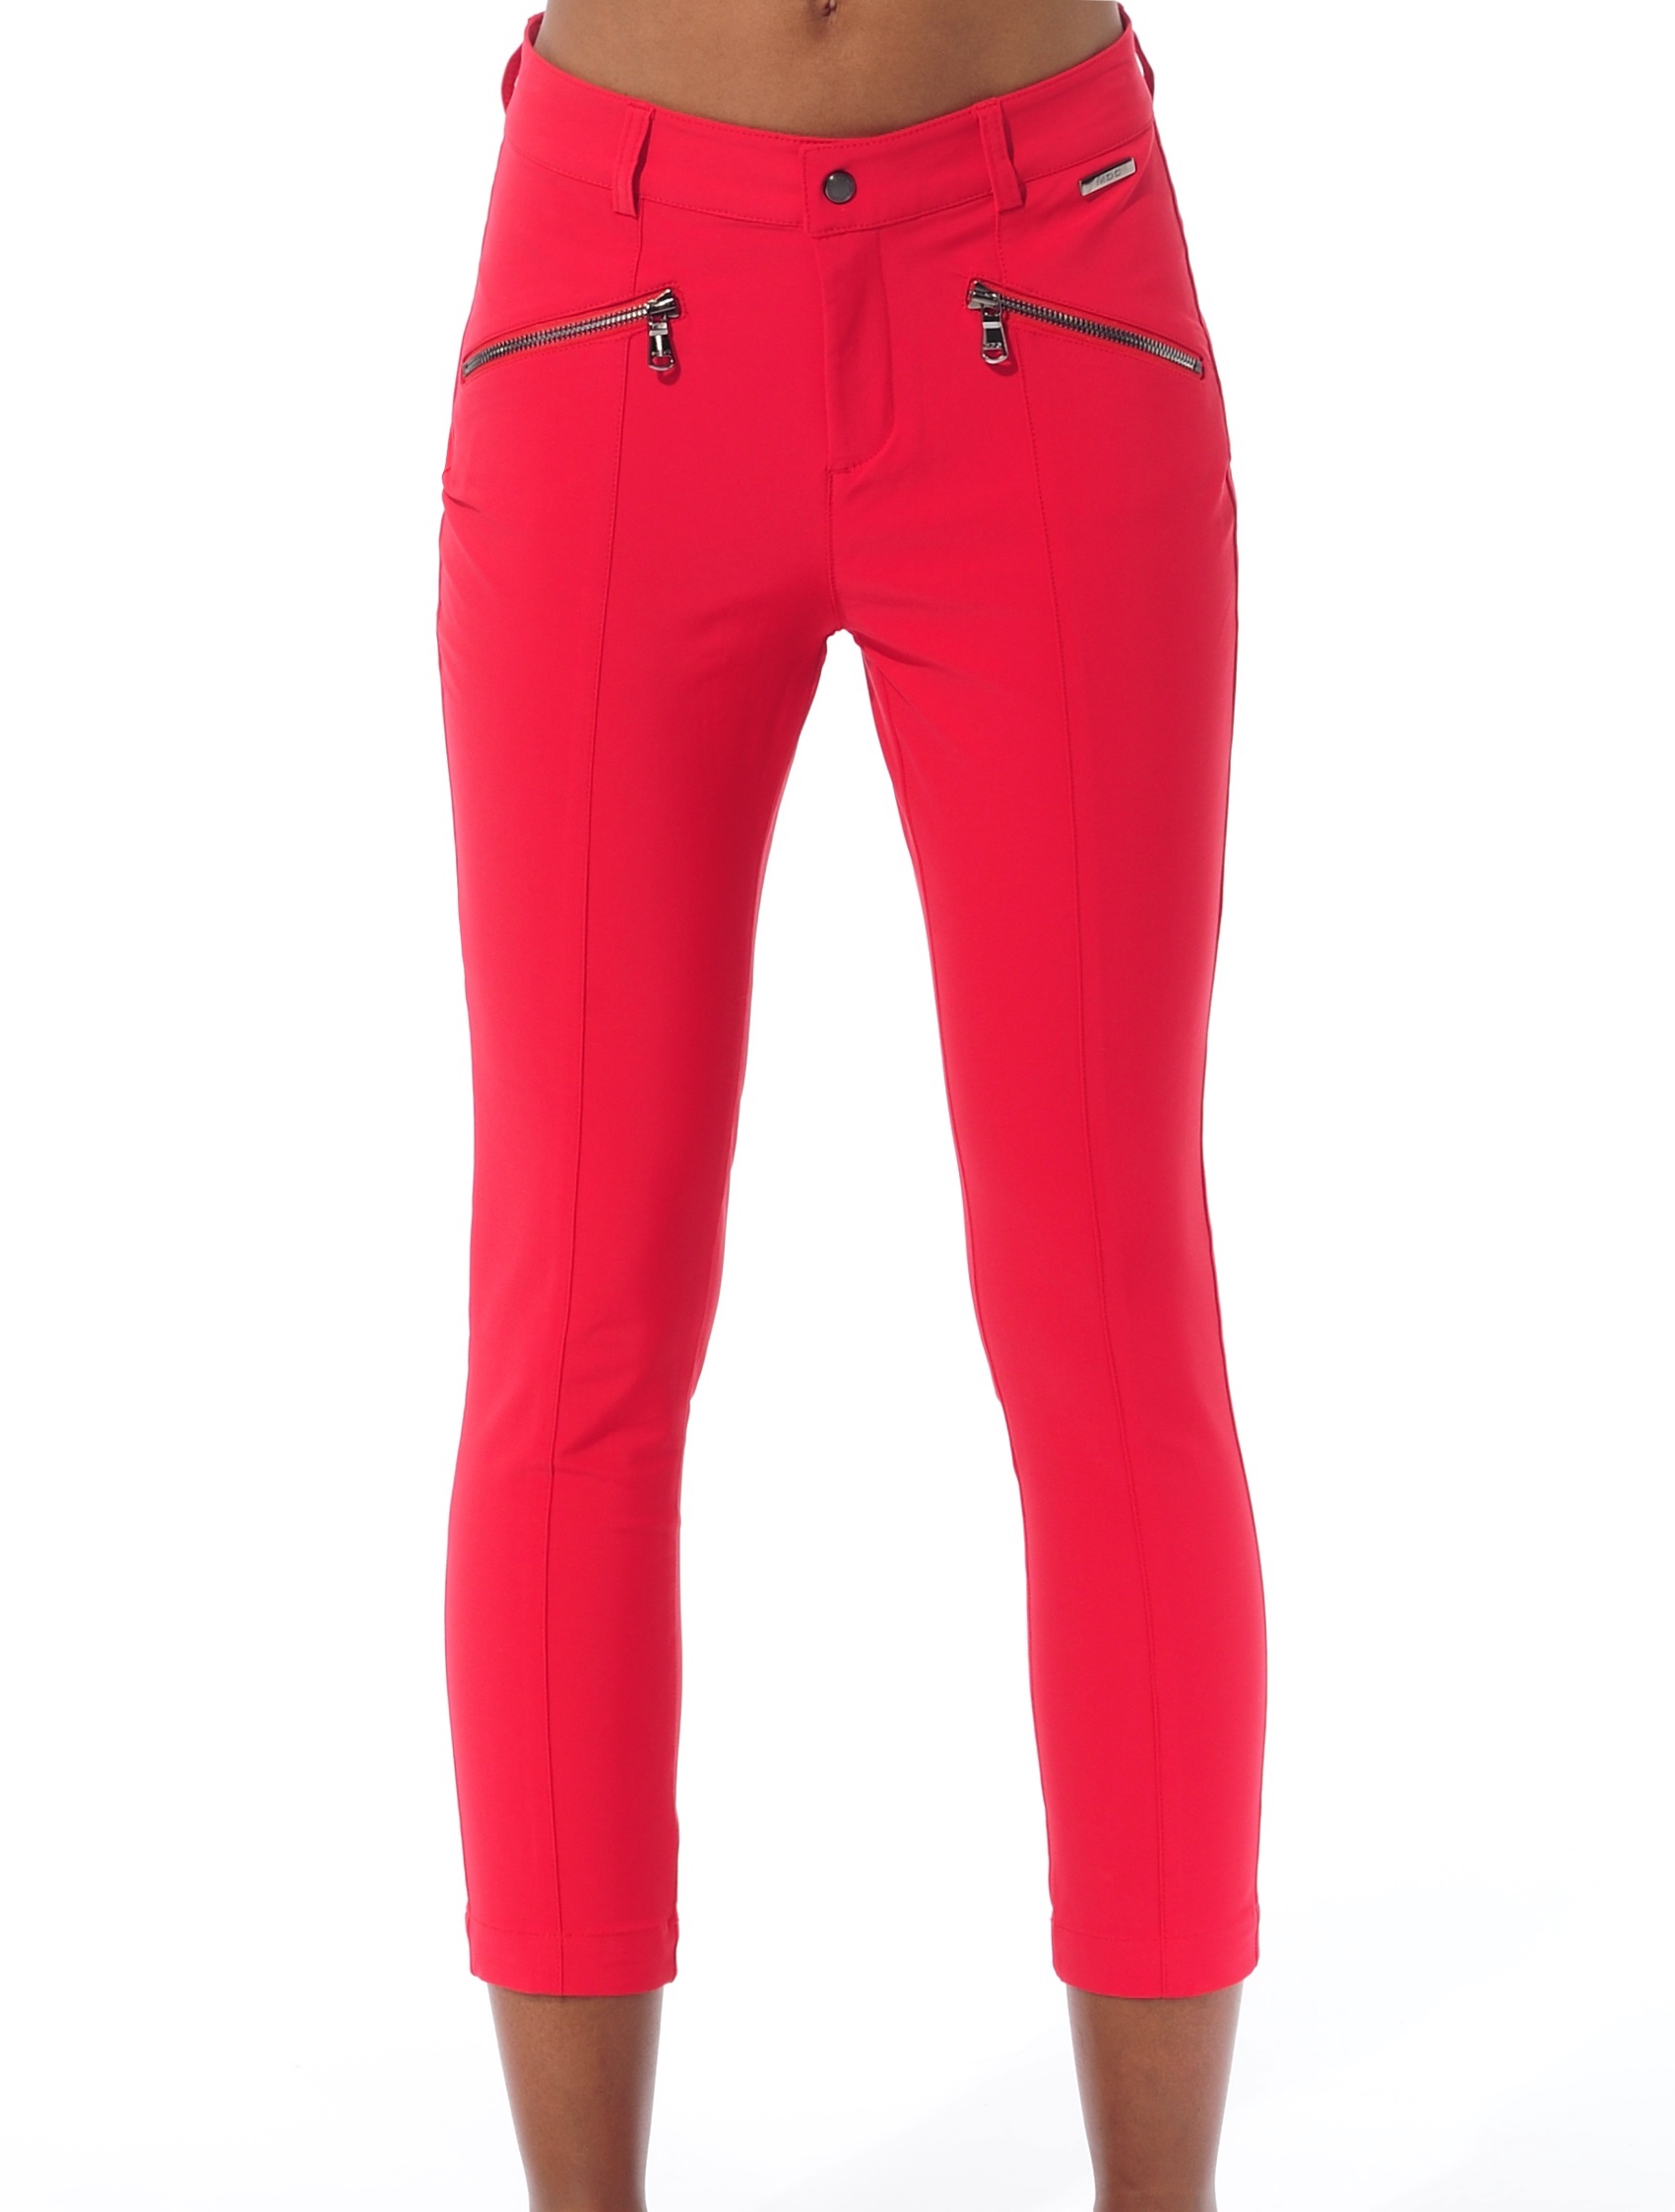 4way stretch curvy cropped pants red 